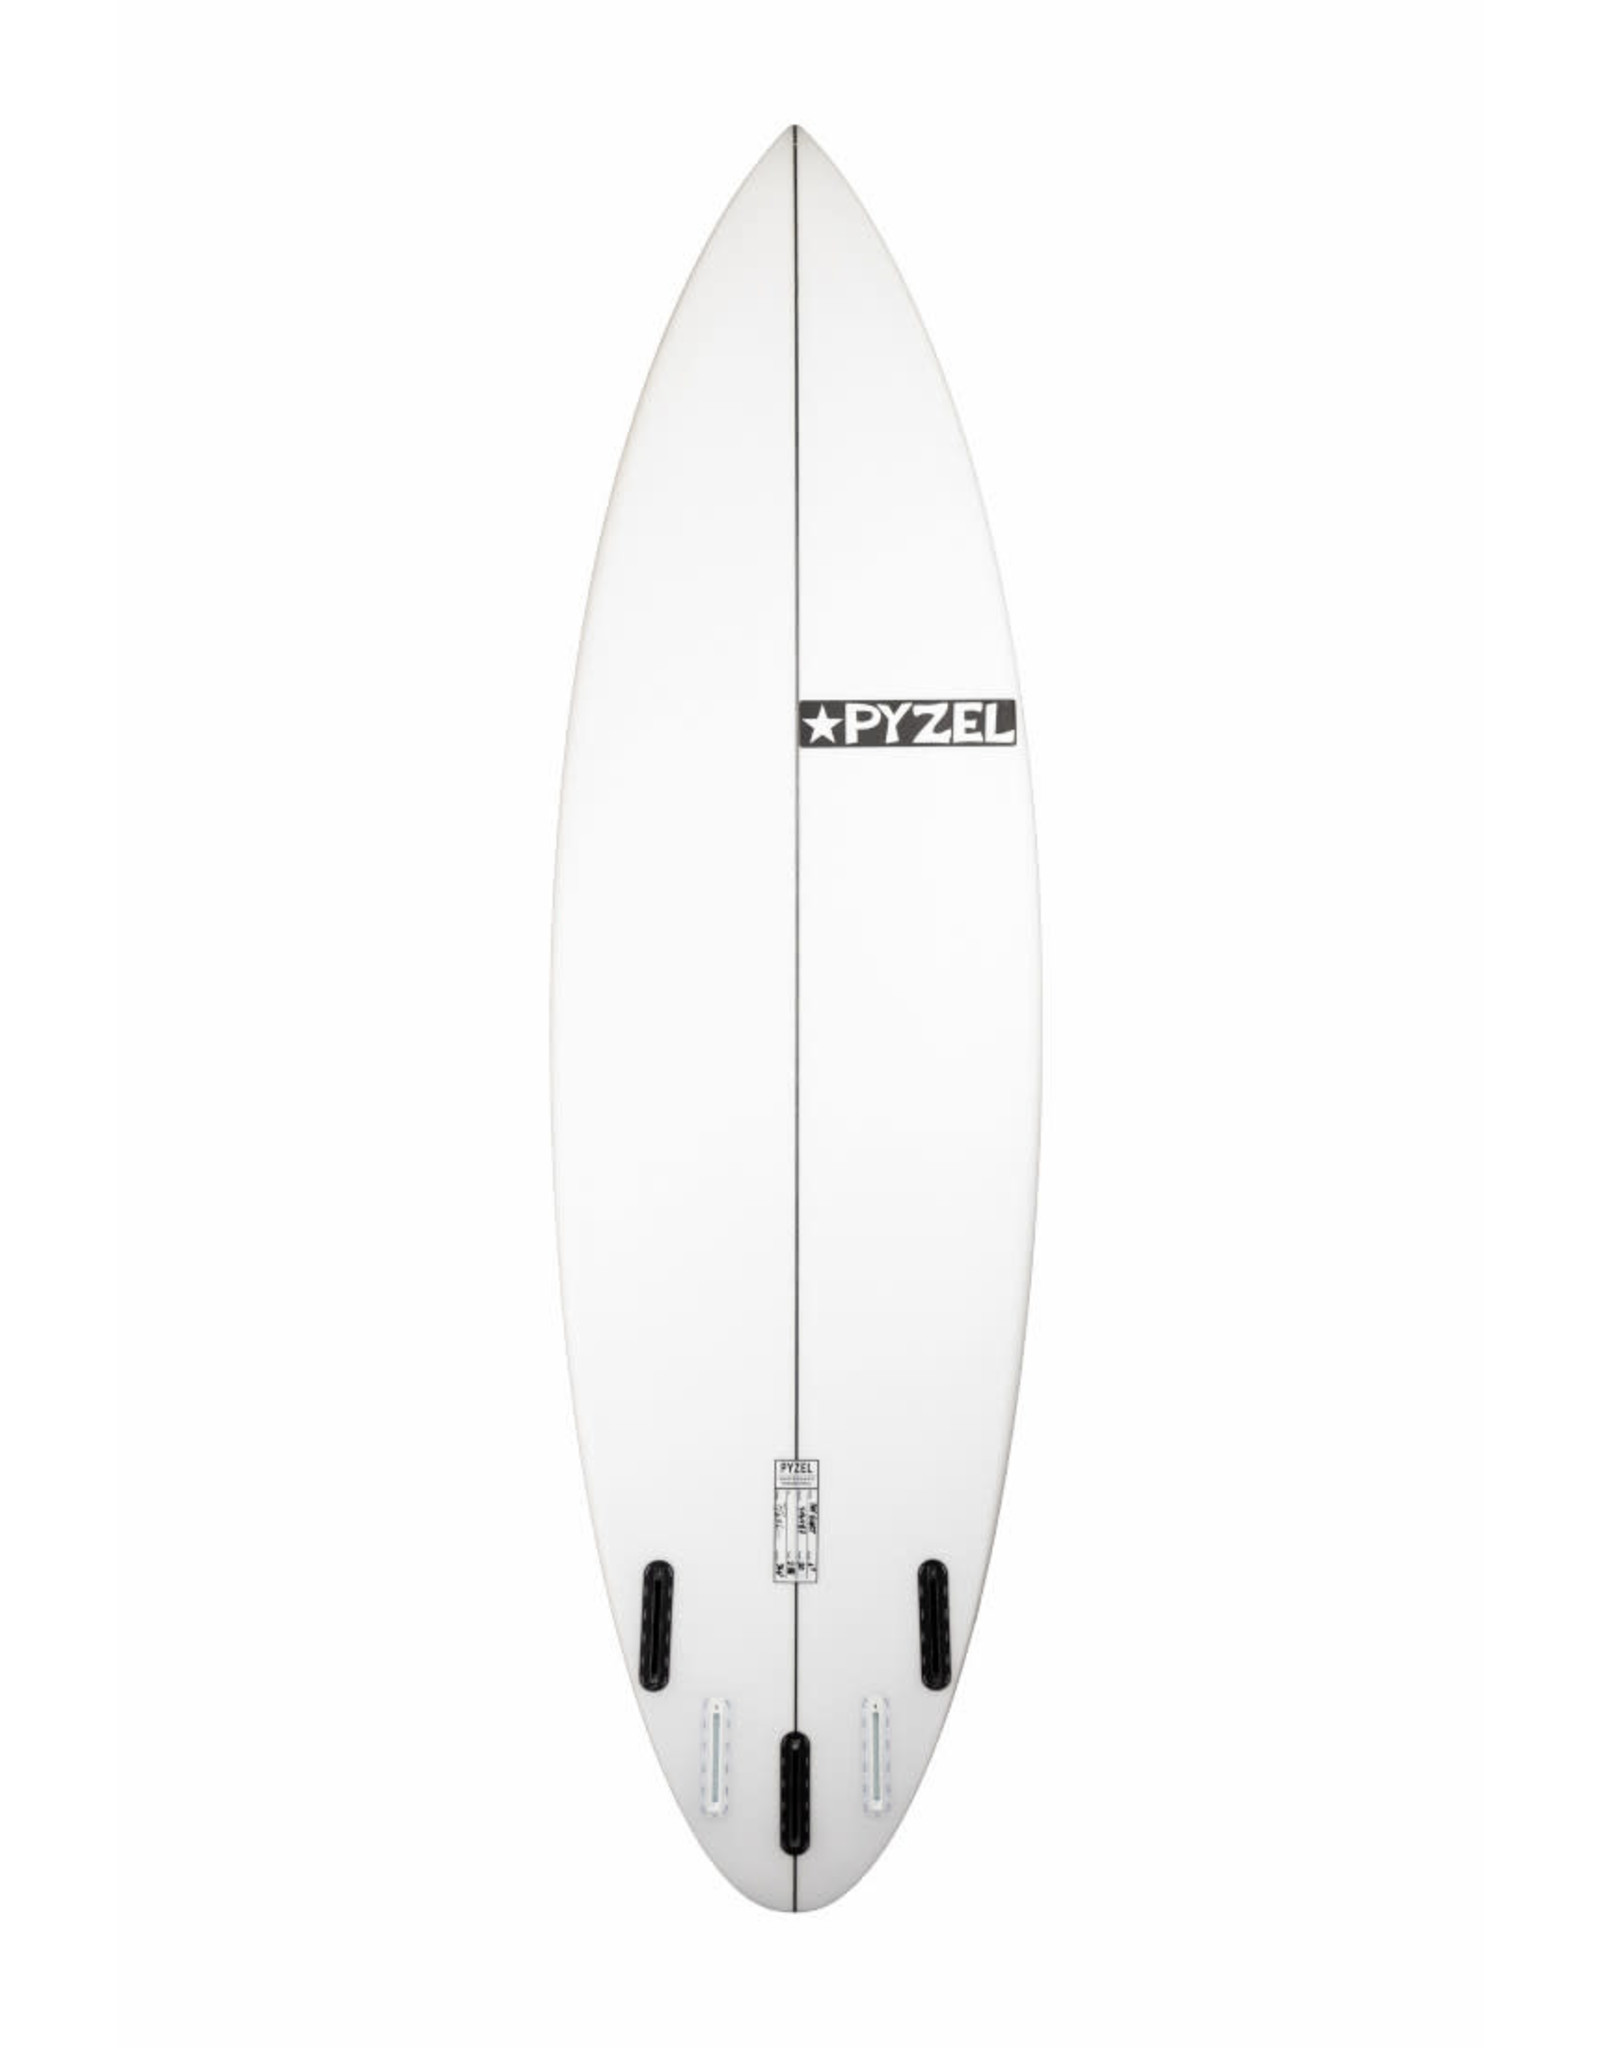 Pyzel Surfboards Pyzel 6'3" Ghost PU Futures 3 Fins